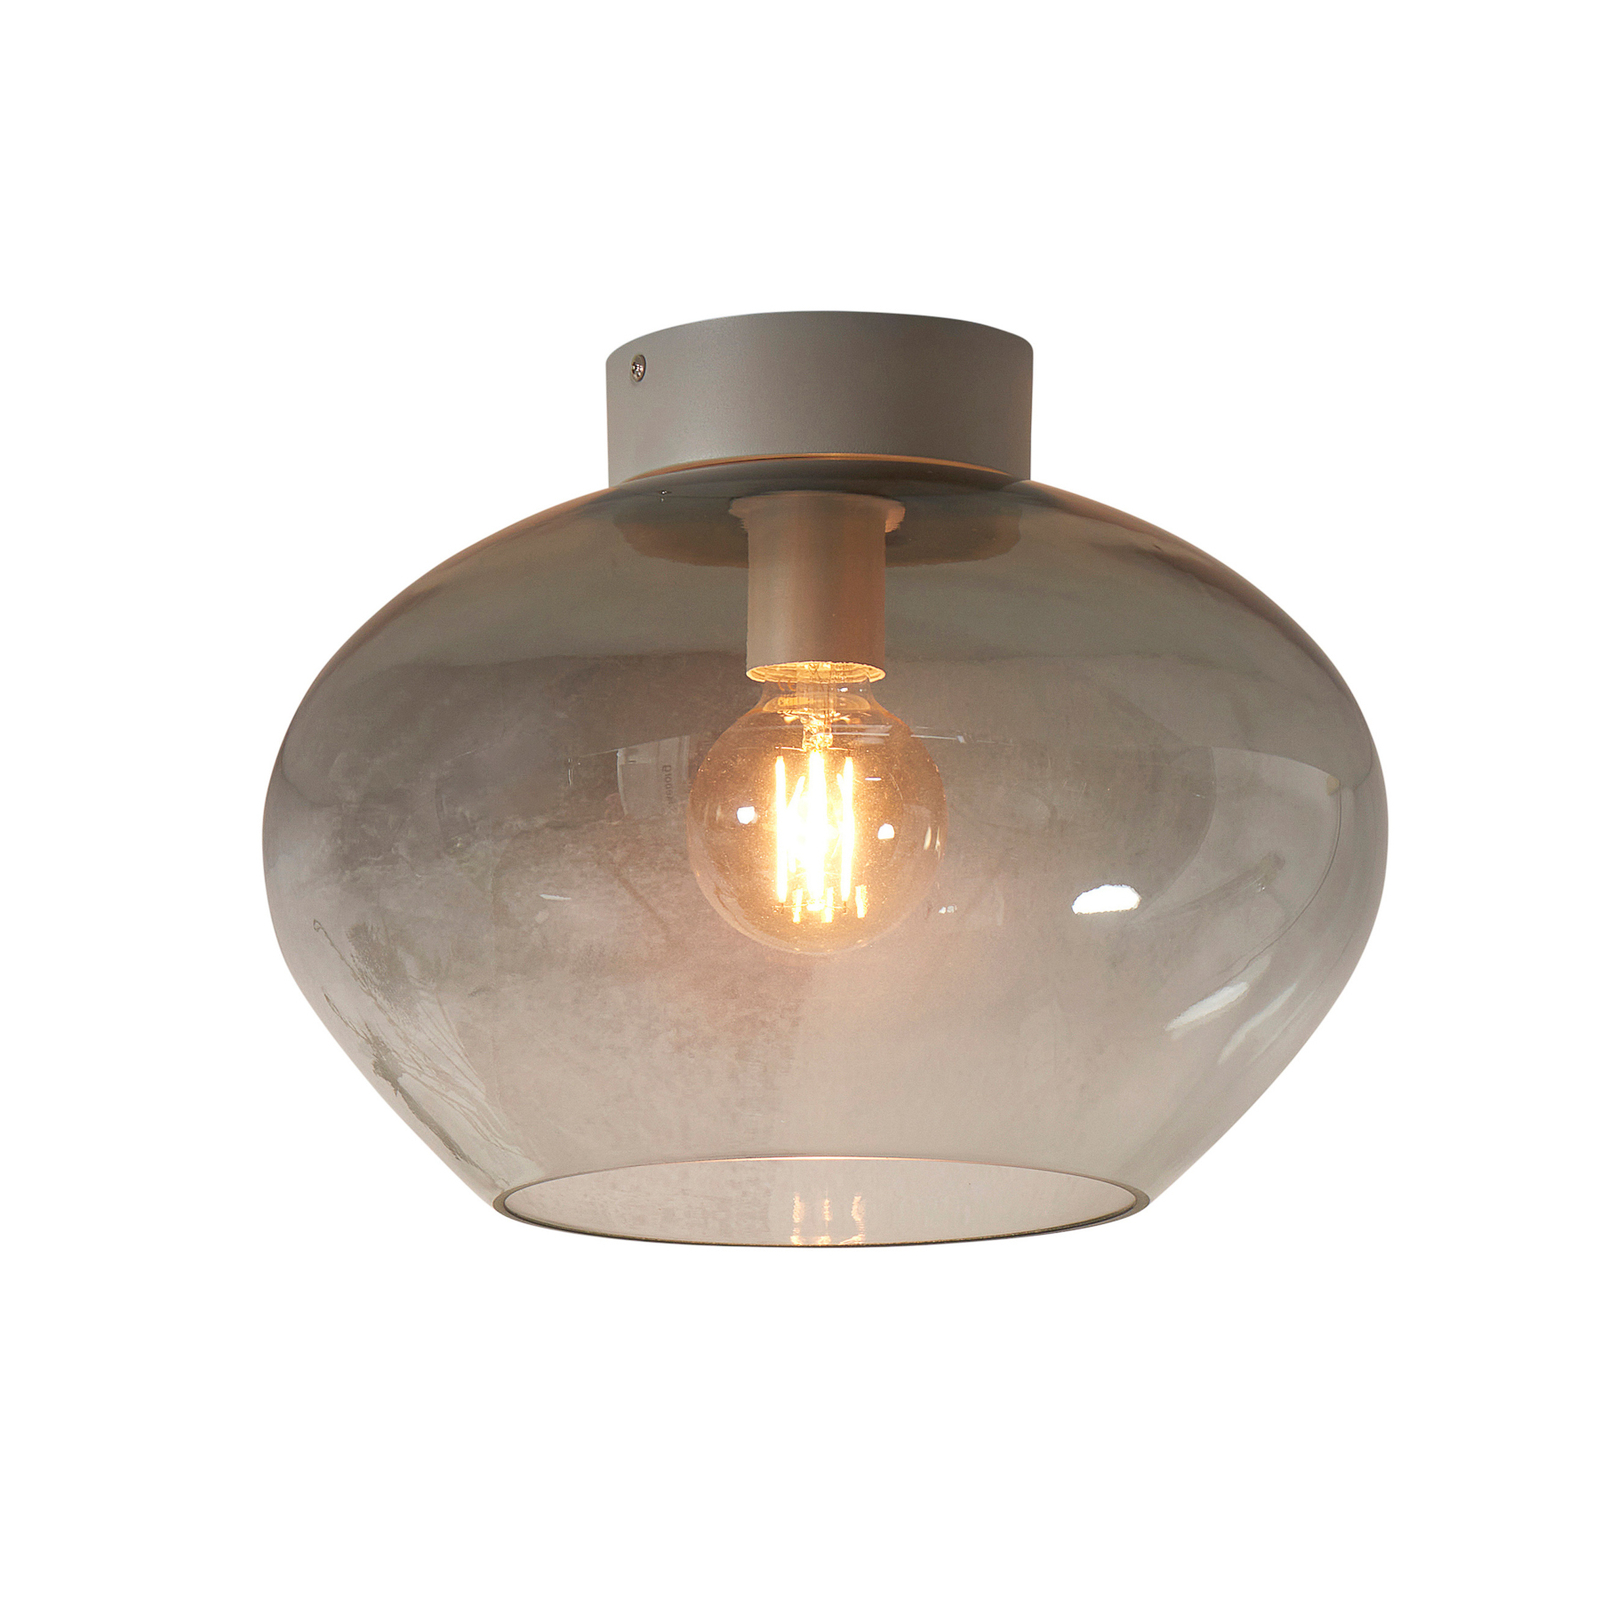 It's about RoMi Bologna ceiling light, light grey